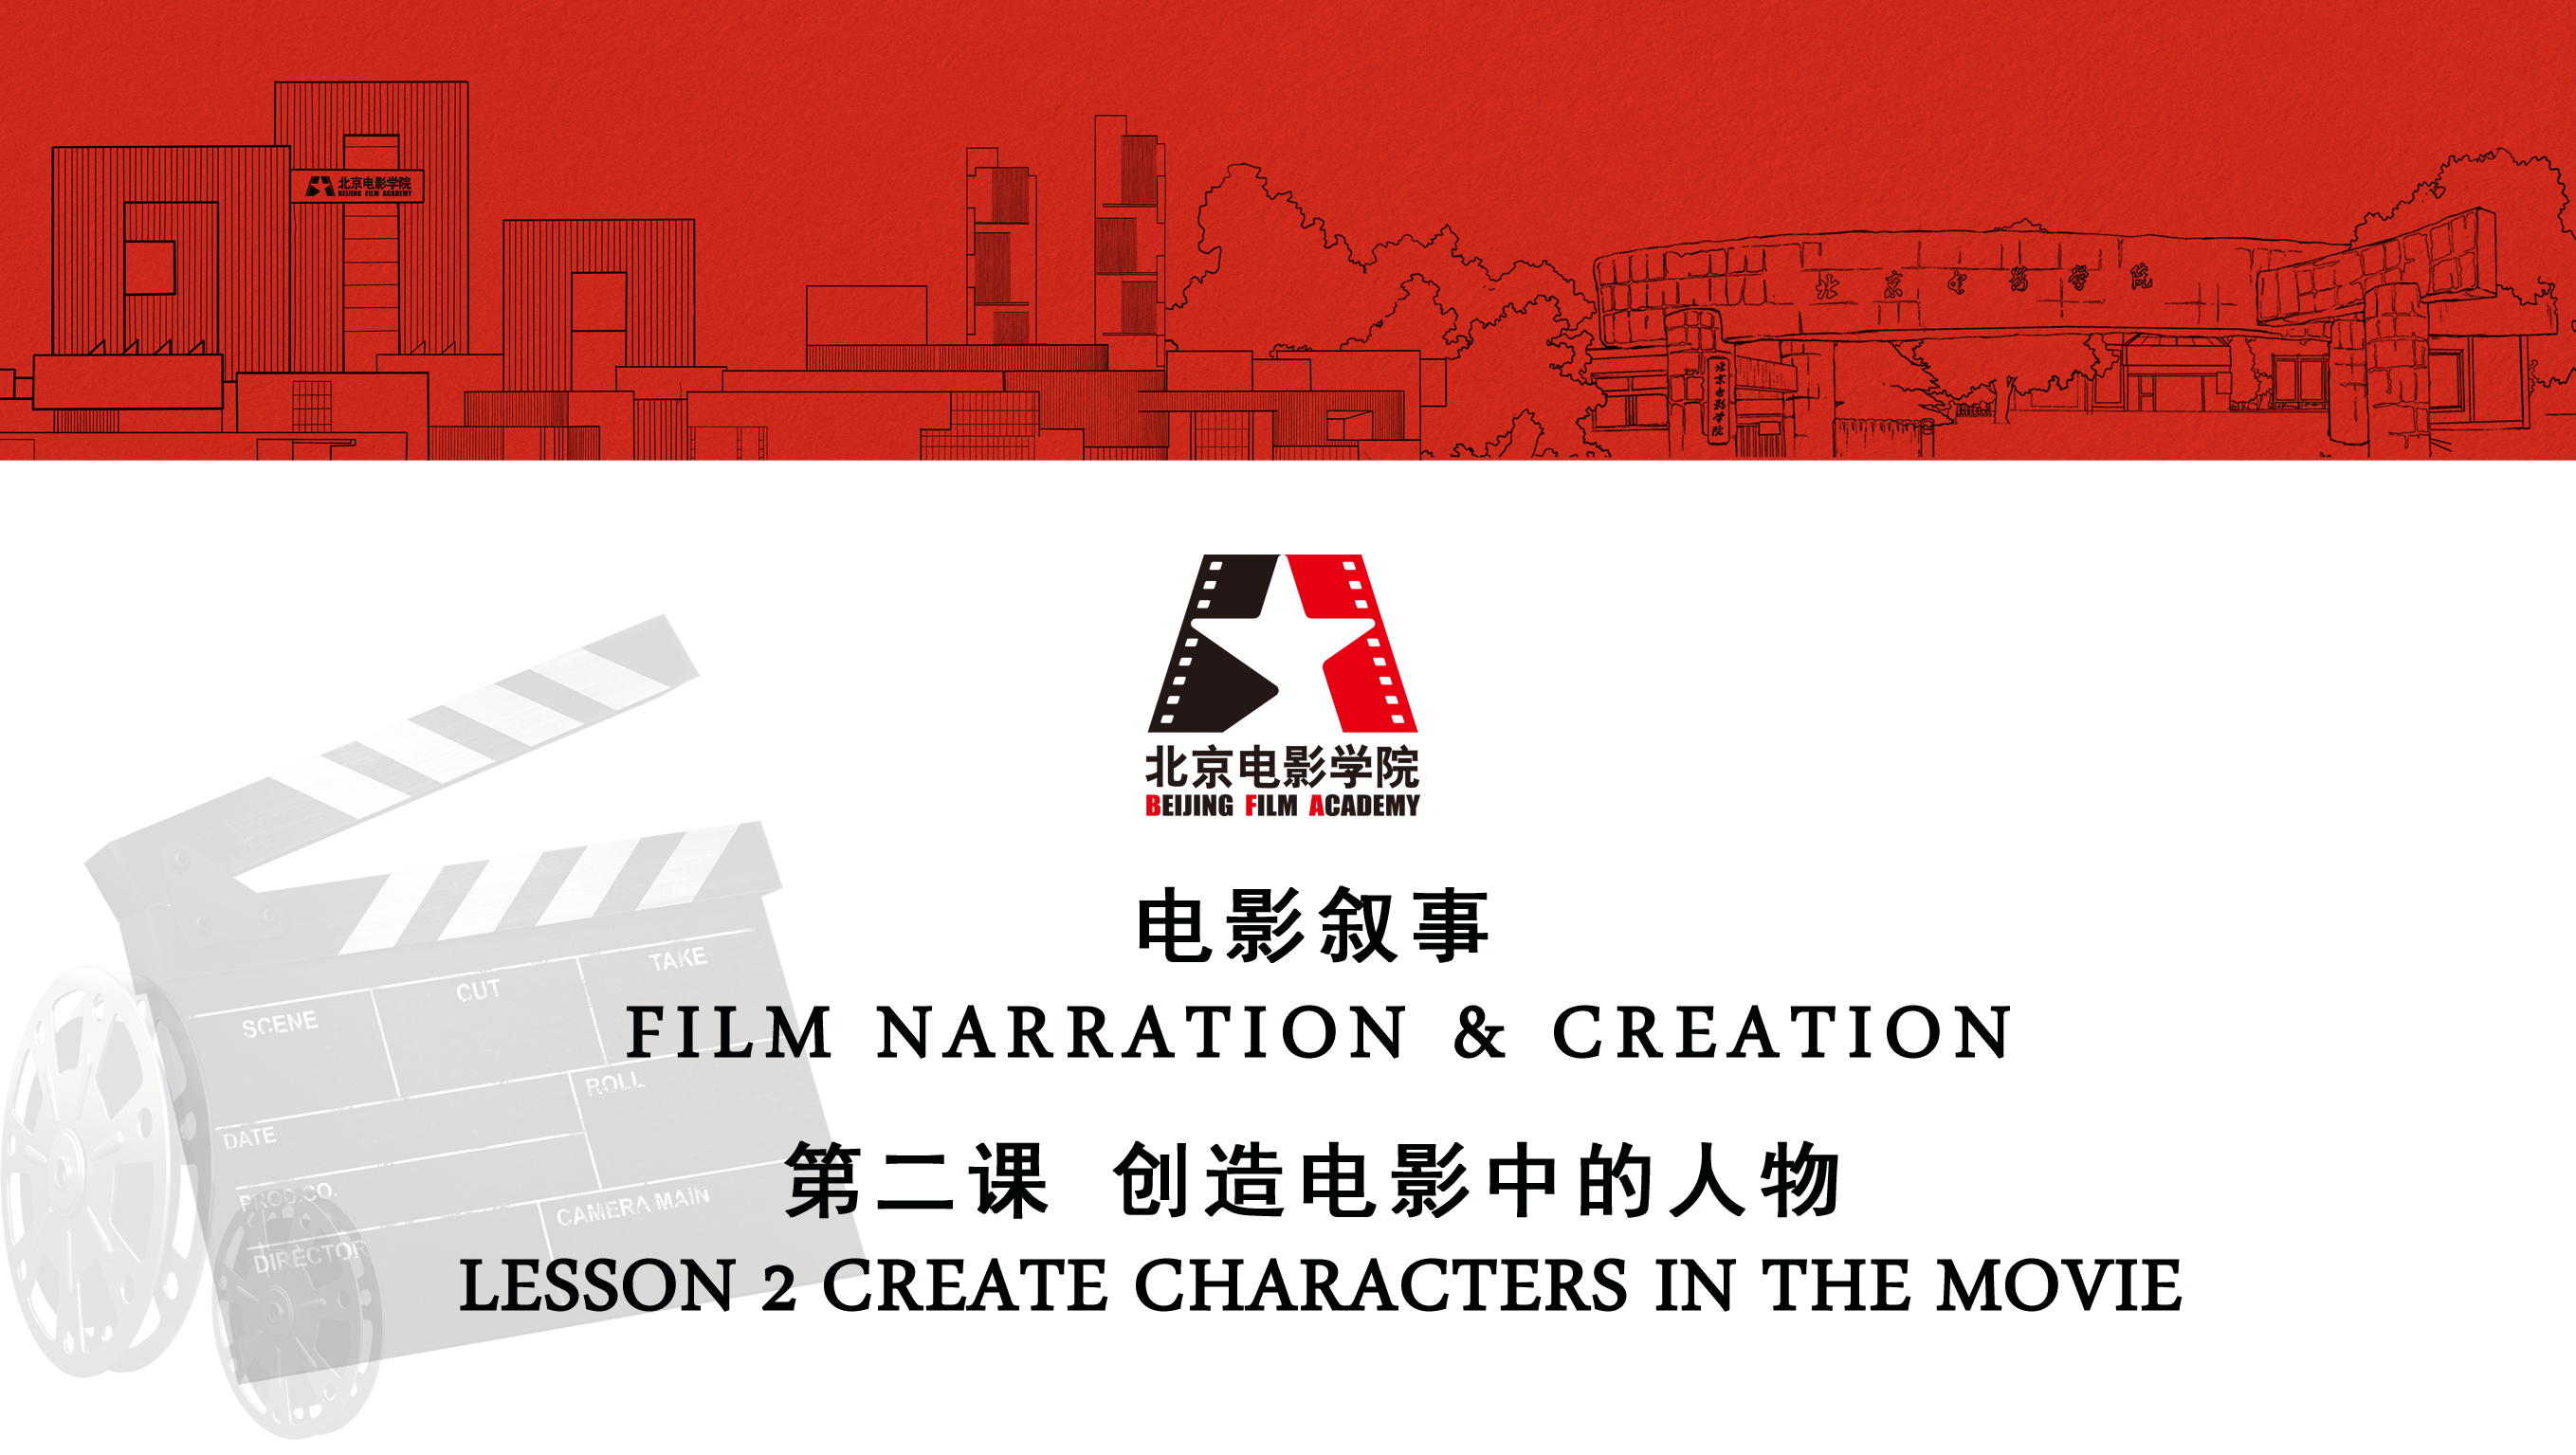 FILM NARRATION & CREATION LESSON 2 CREATE CHARACTERS IN THE MOVIE